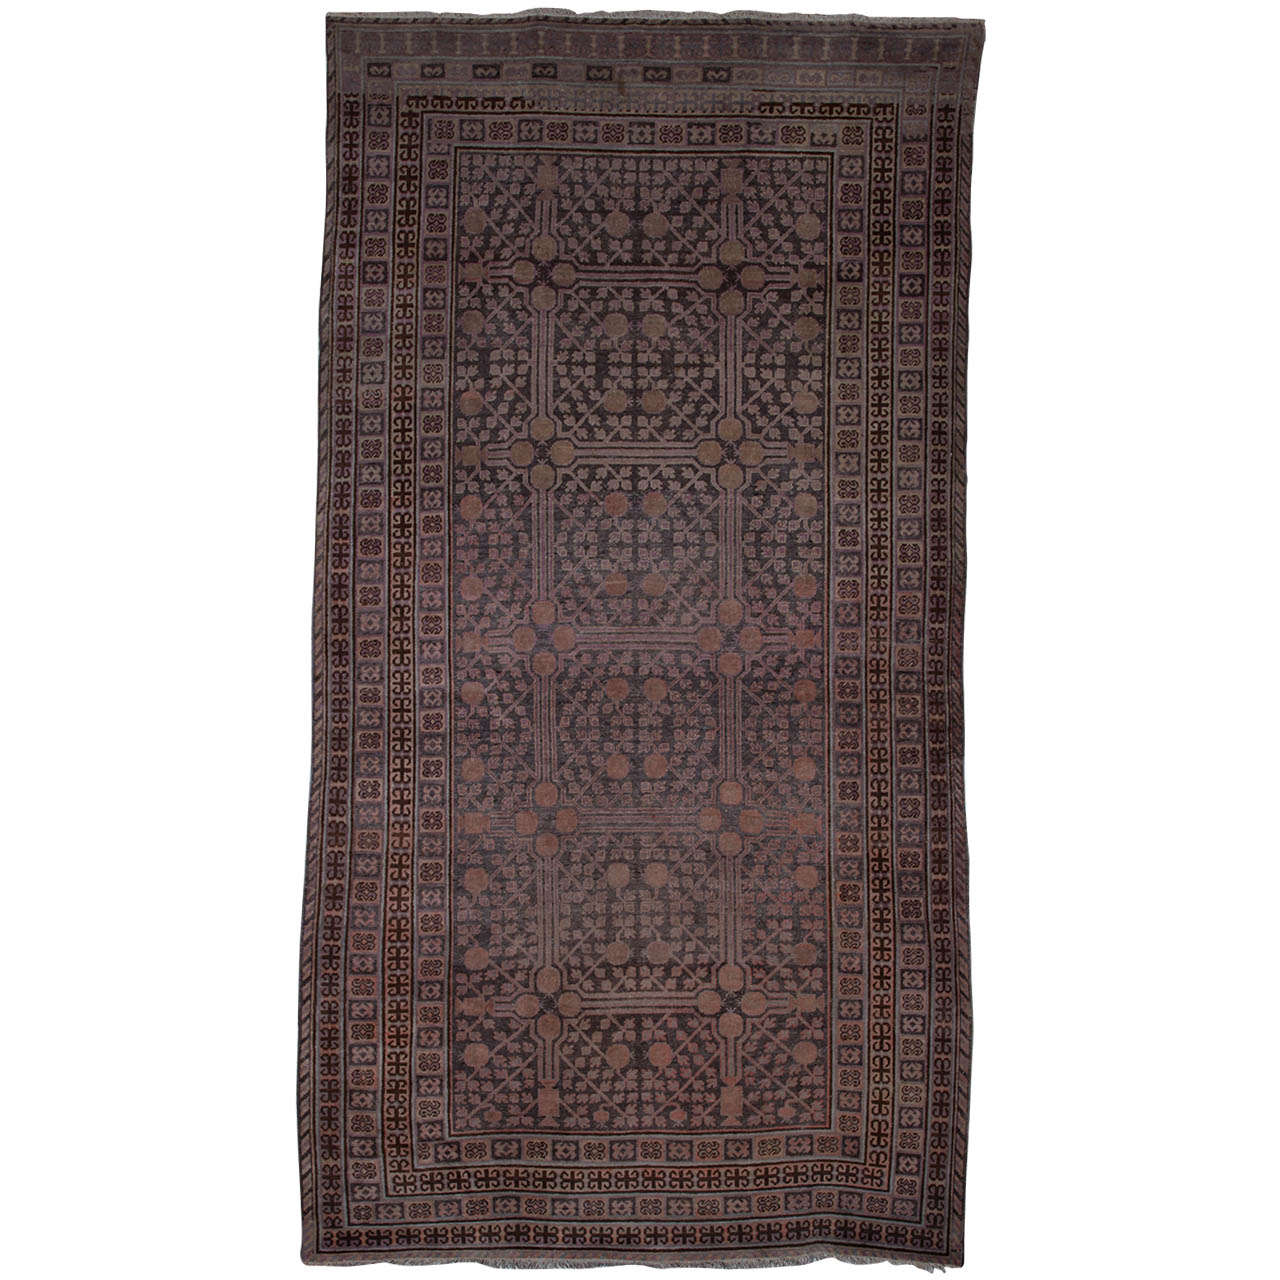 Stunning antique East Turkestan Khotan rug, with a pomegranate trellis overall within a series of reciprocal geometric stripes.
Period: circa 1920 
Country of origin: East Turkestan

Measures: cm 380 x 195.